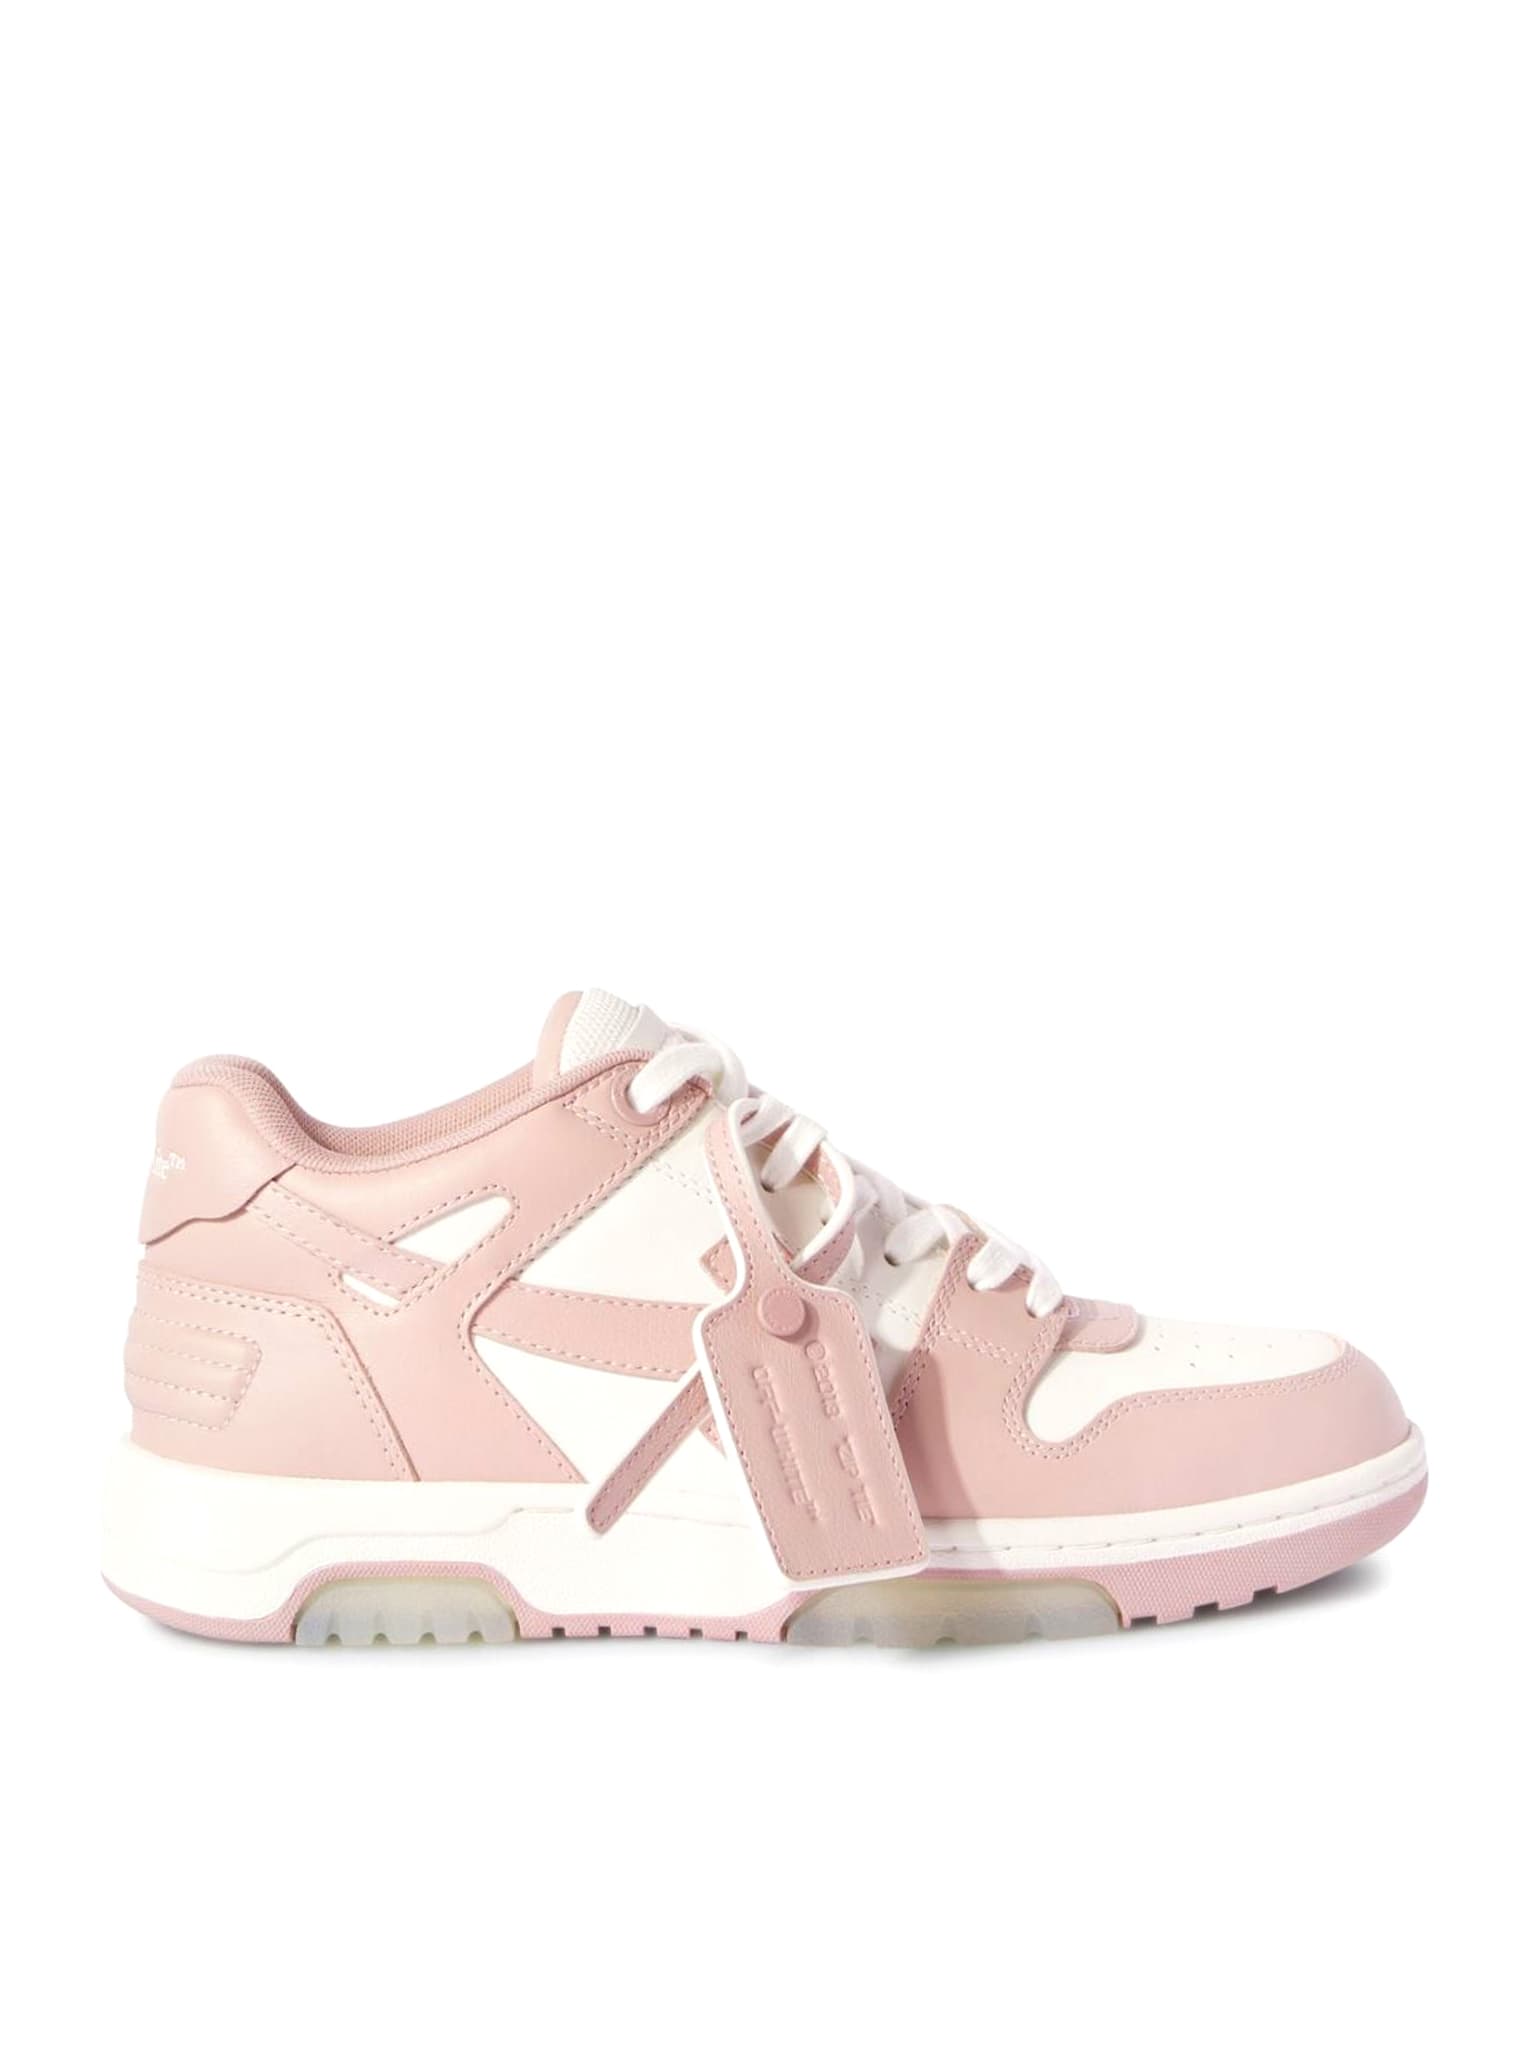 OFF-WHITE OUT OF OFFICE CALF LEATHER WHITE PINK